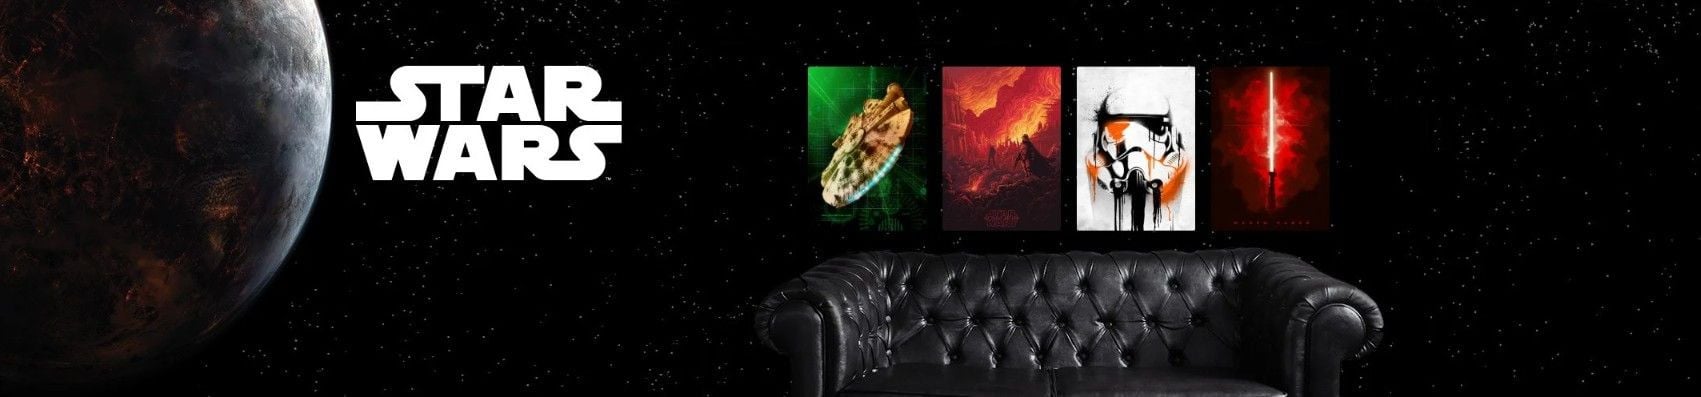 Star Wars Officialy Licensed Prints on Wall